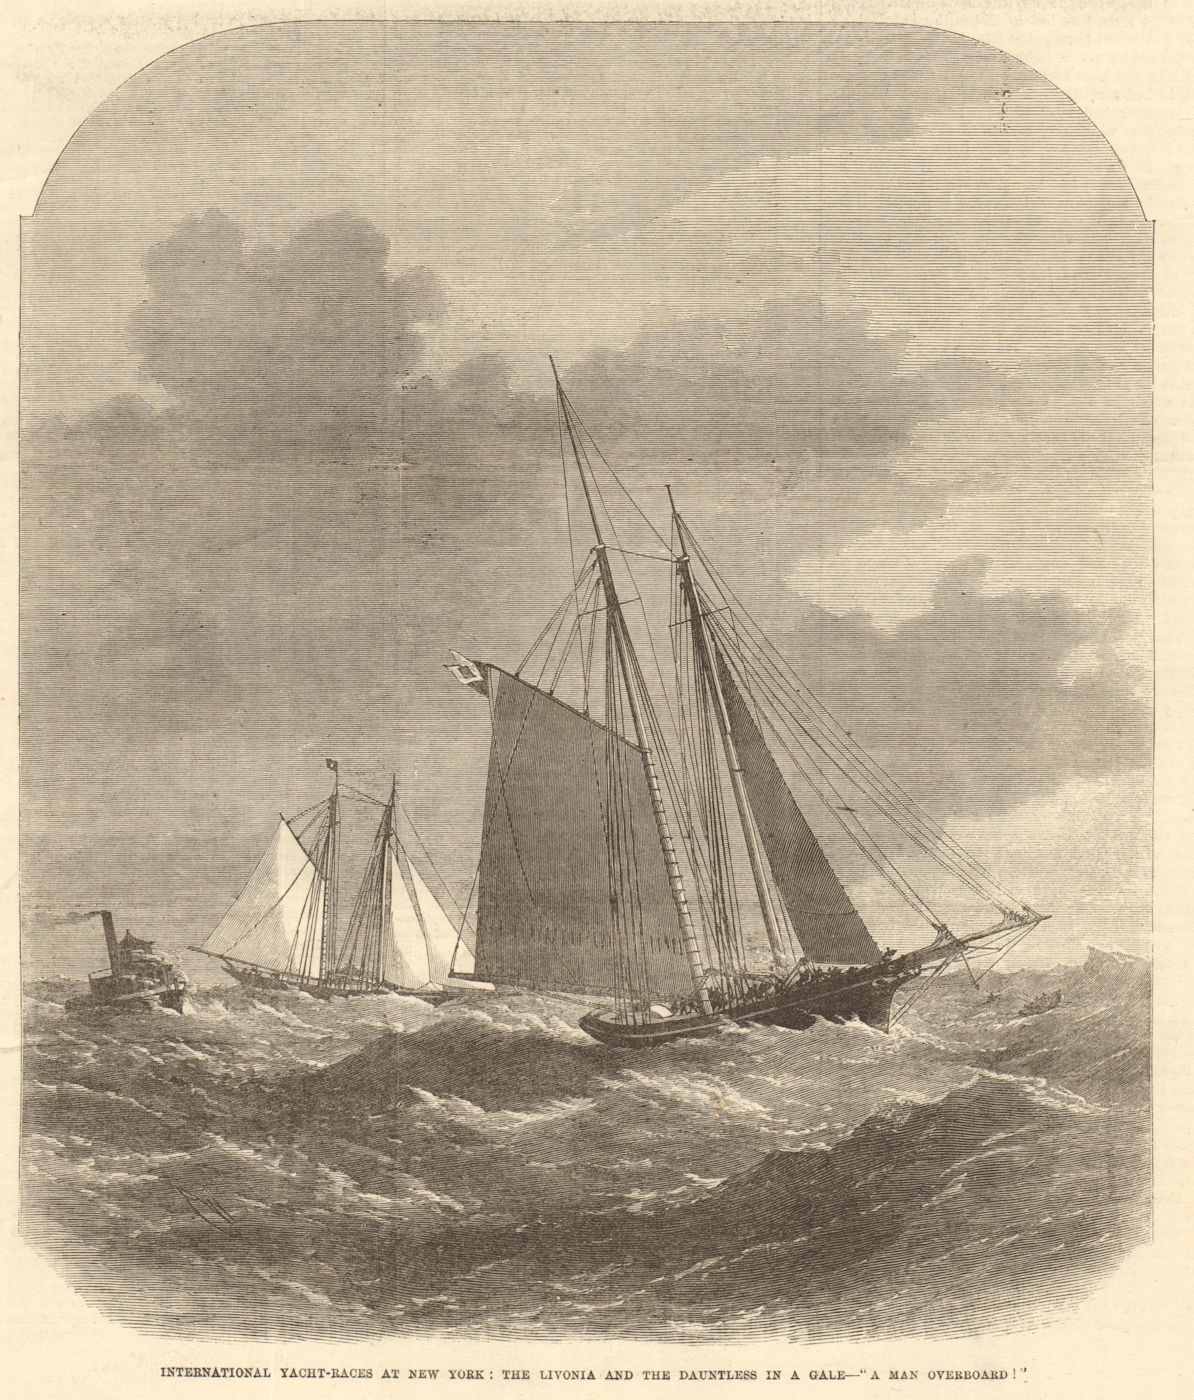 Associate Product Americas Cup yacht races at New York. Livonia & Dauntless. Man overboard 1871